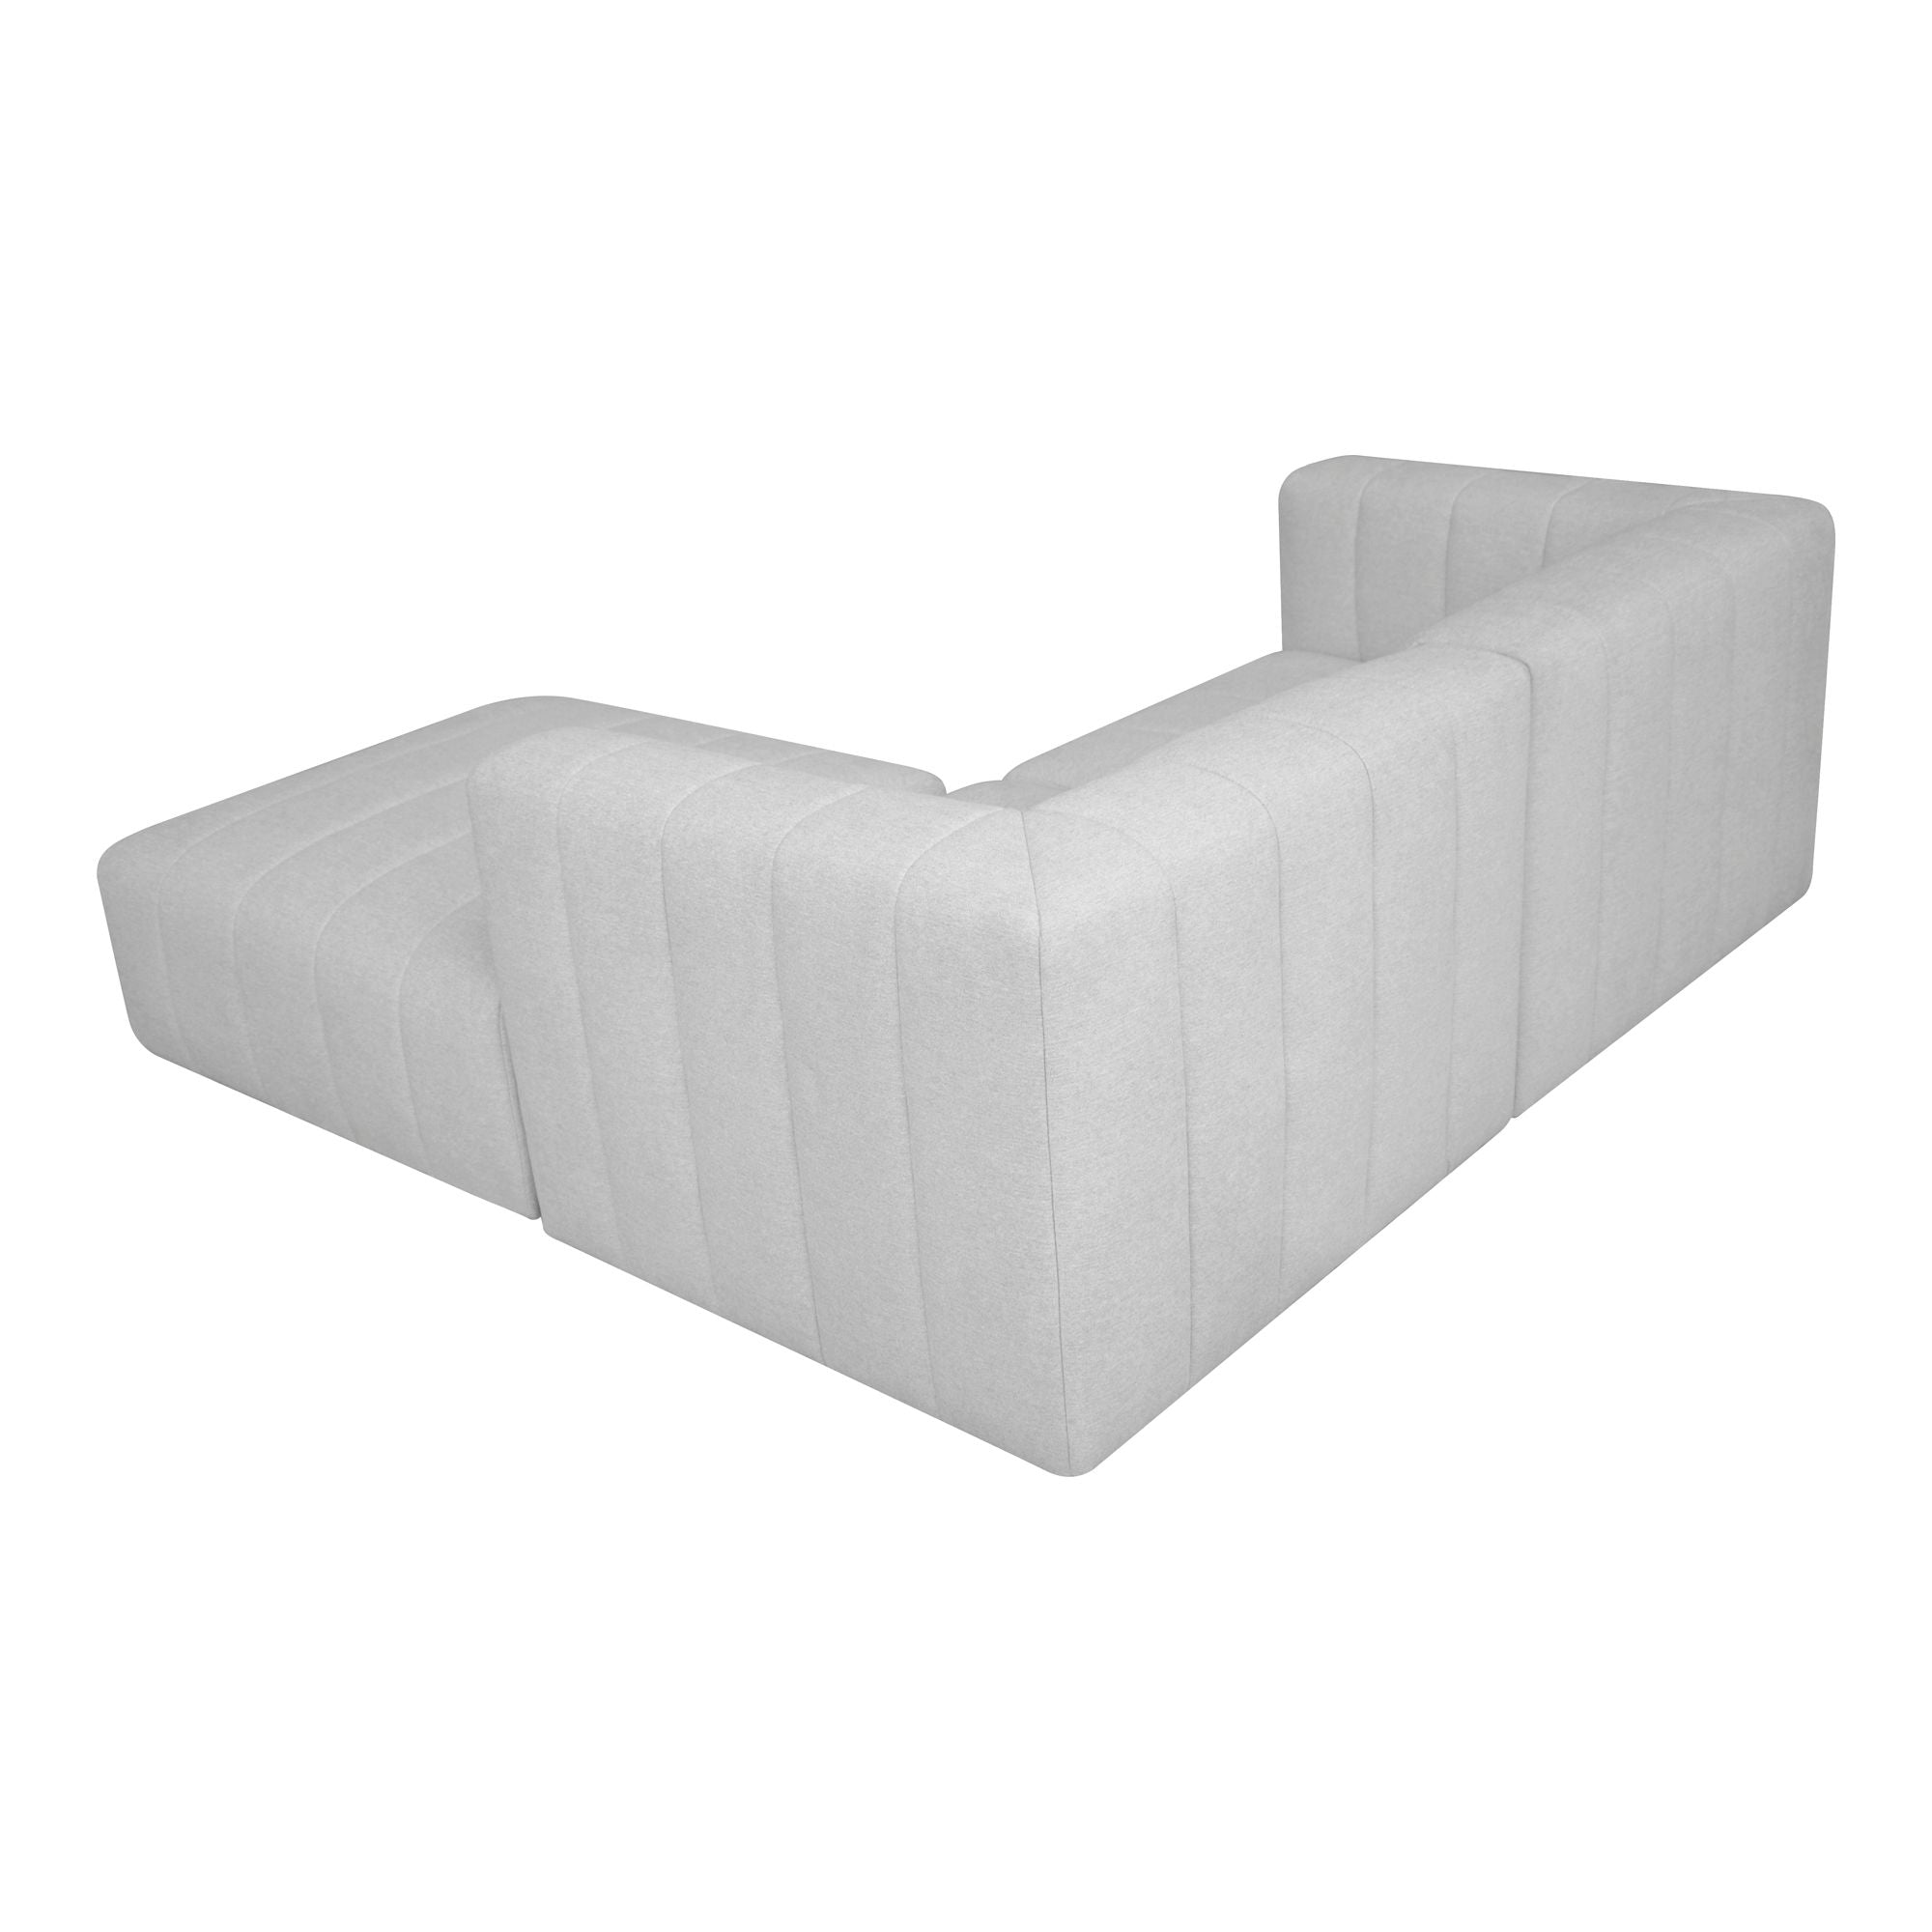 Lyric - Nook Modular Sectional Oatmeal - Pearl Silver-Stationary Sectionals-American Furniture Outlet